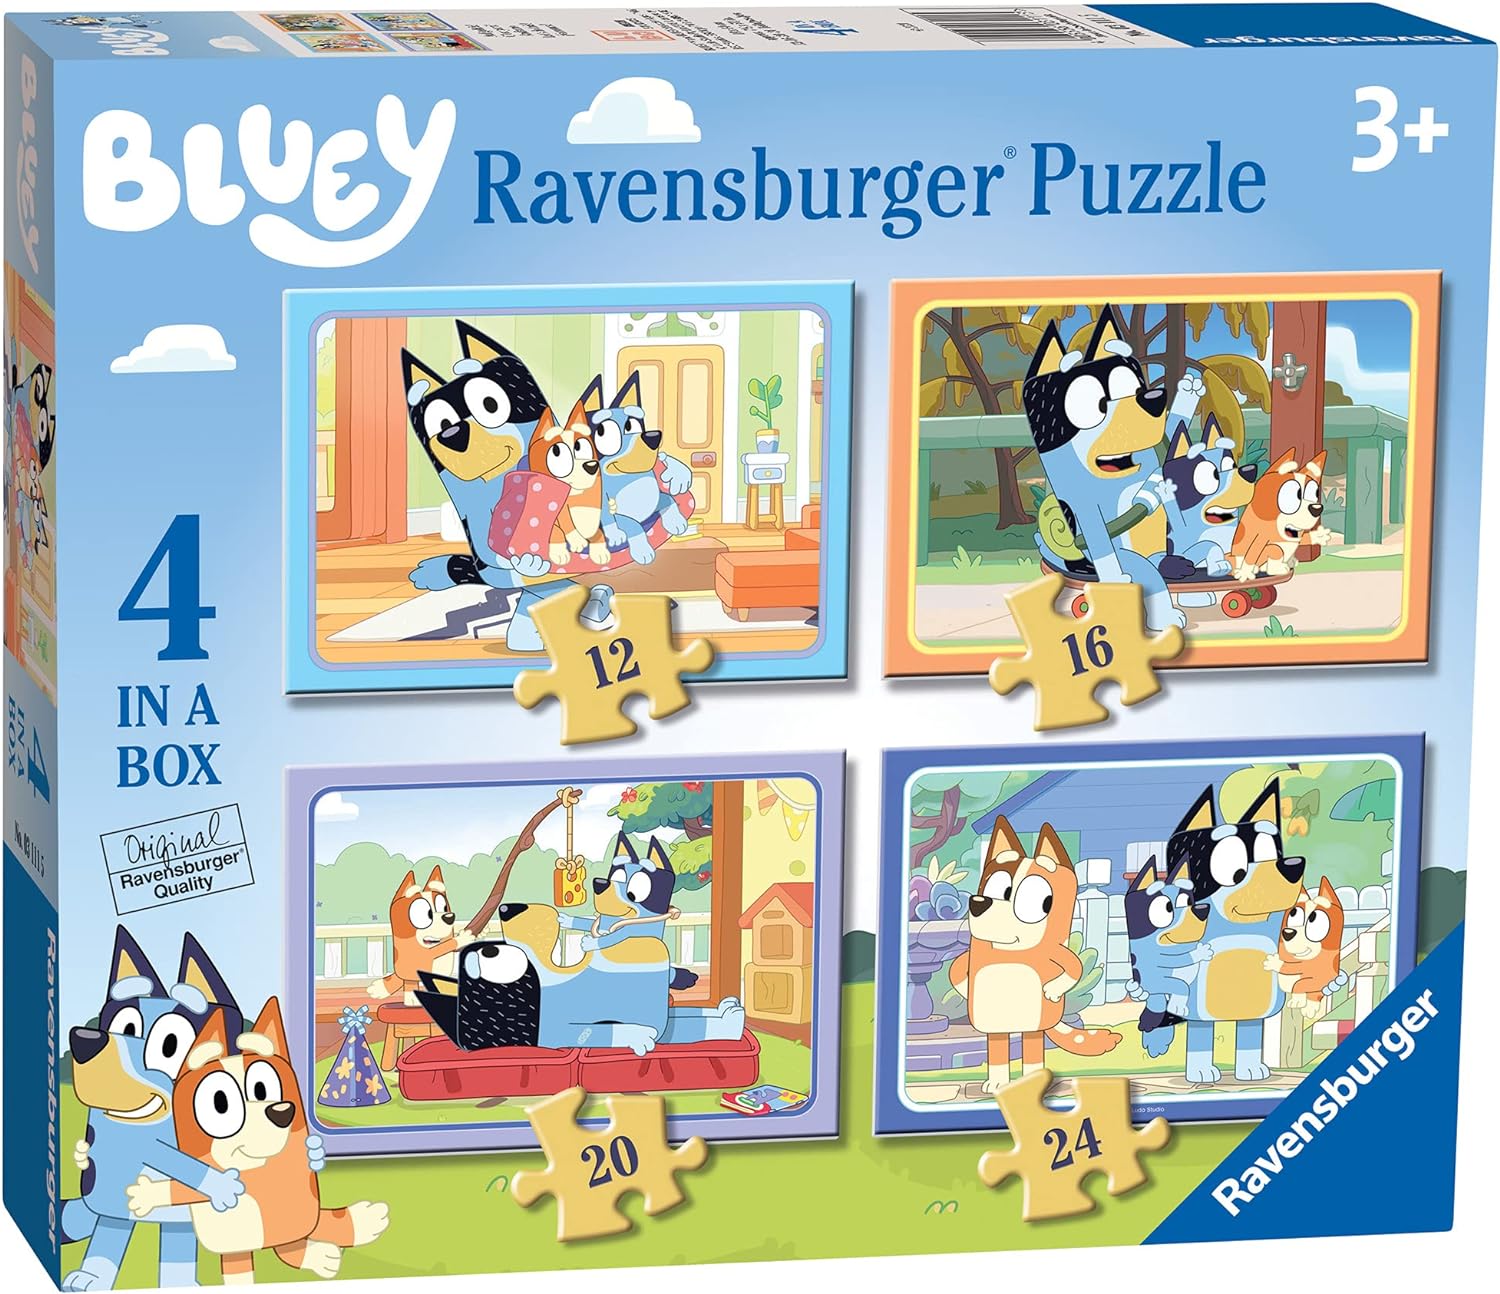 Ravensburger Bluey - 4 in Box (12, 16, 20, 24 Pieces) Kids Jigsaw Puzzles Age 3 Up